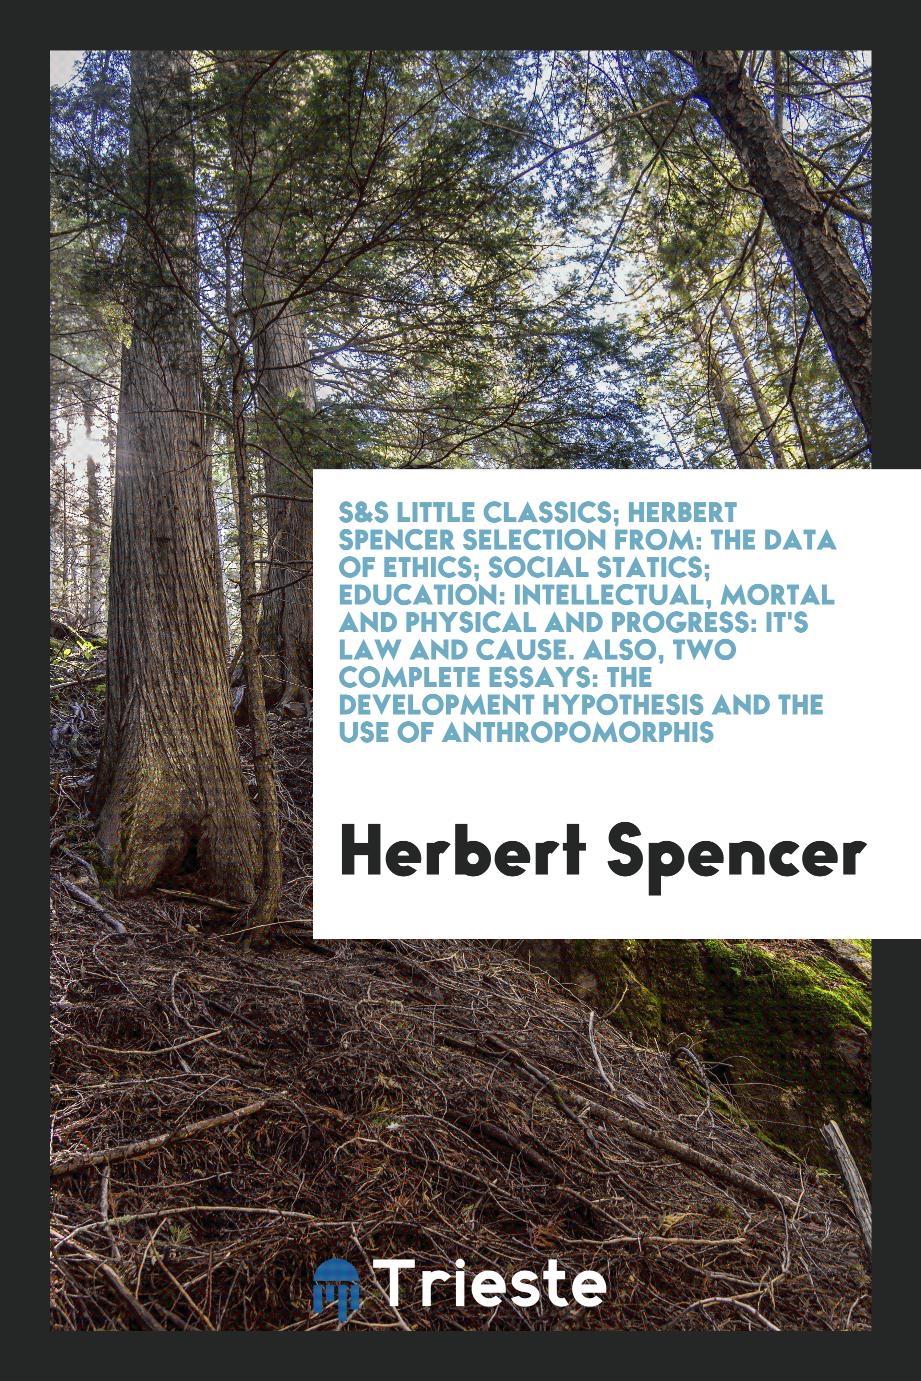 S&S Little Classics; Herbert Spencer Selection From: The Data of Ethics; Social Statics; Education: Intellectual, Mortal and Physical and Progress: It's Law and Cause. Also, Two Complete Essays: The Development Hypothesis and the Use of Anthropomorphis